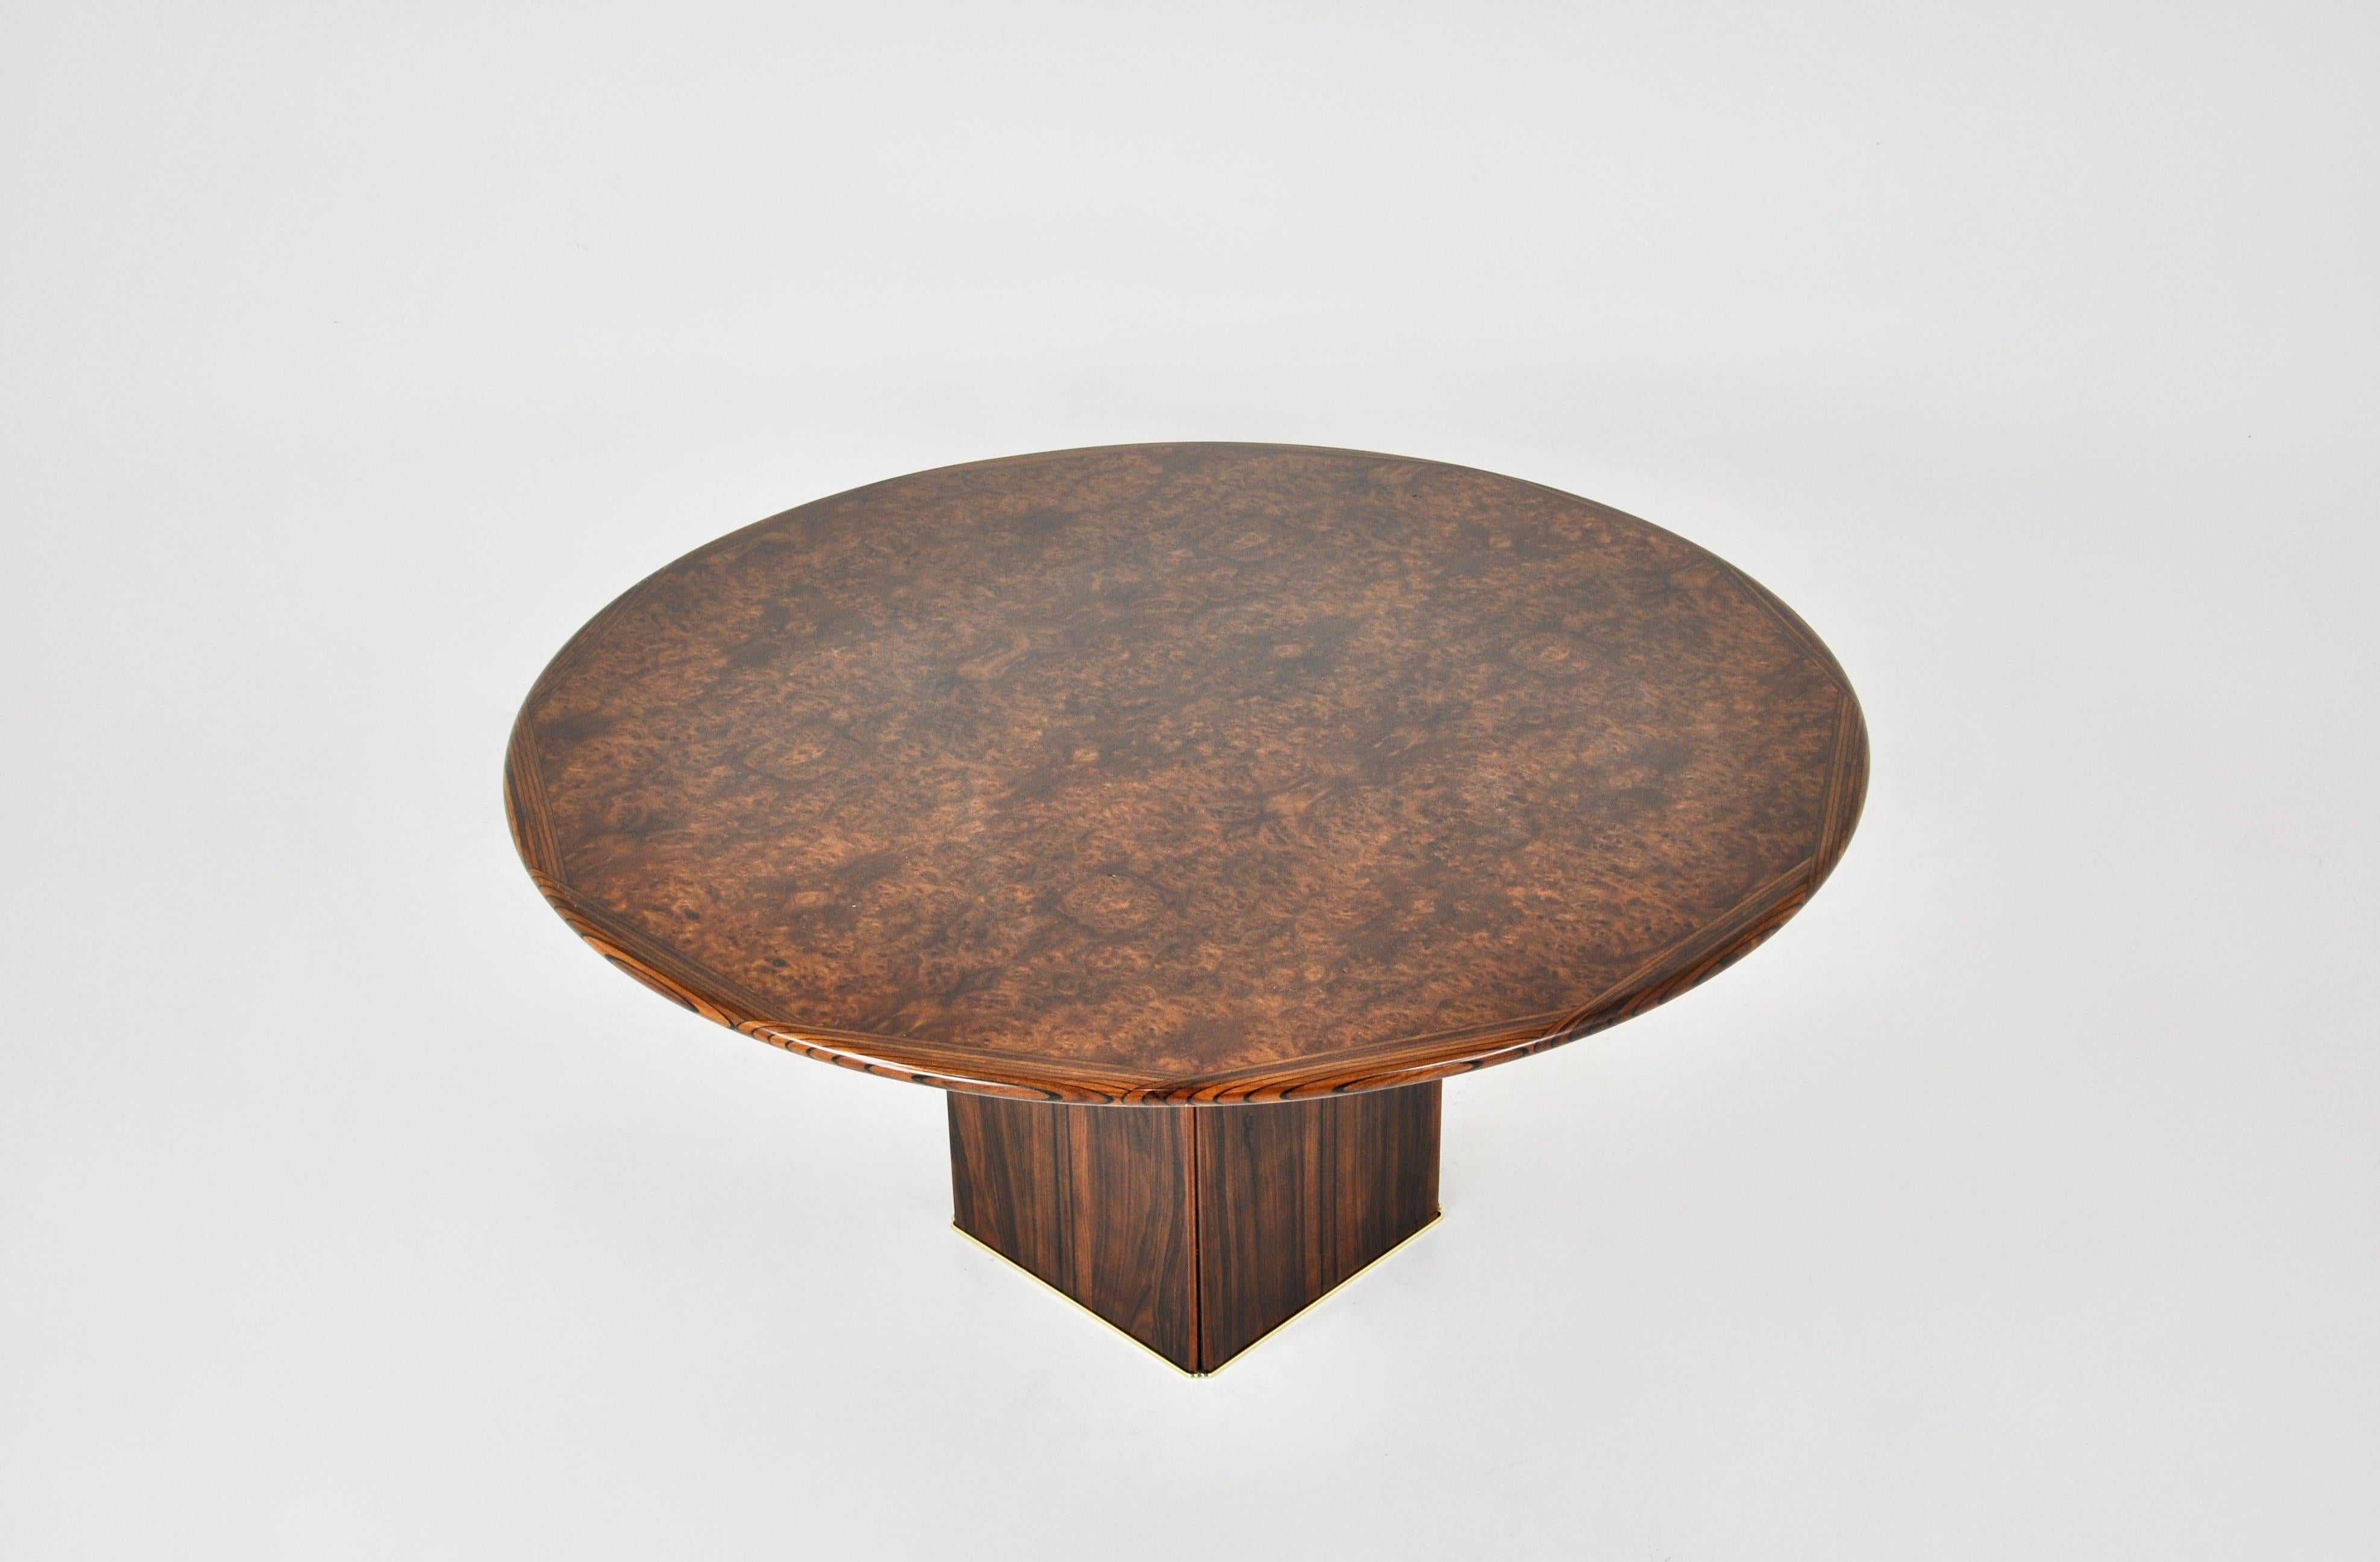 Round wooden table by Tobia and Afra Scarpa. Bottom of leg encircled in brass. Stamped concrete block inside the table for stability. Wear due to time and age of the table.